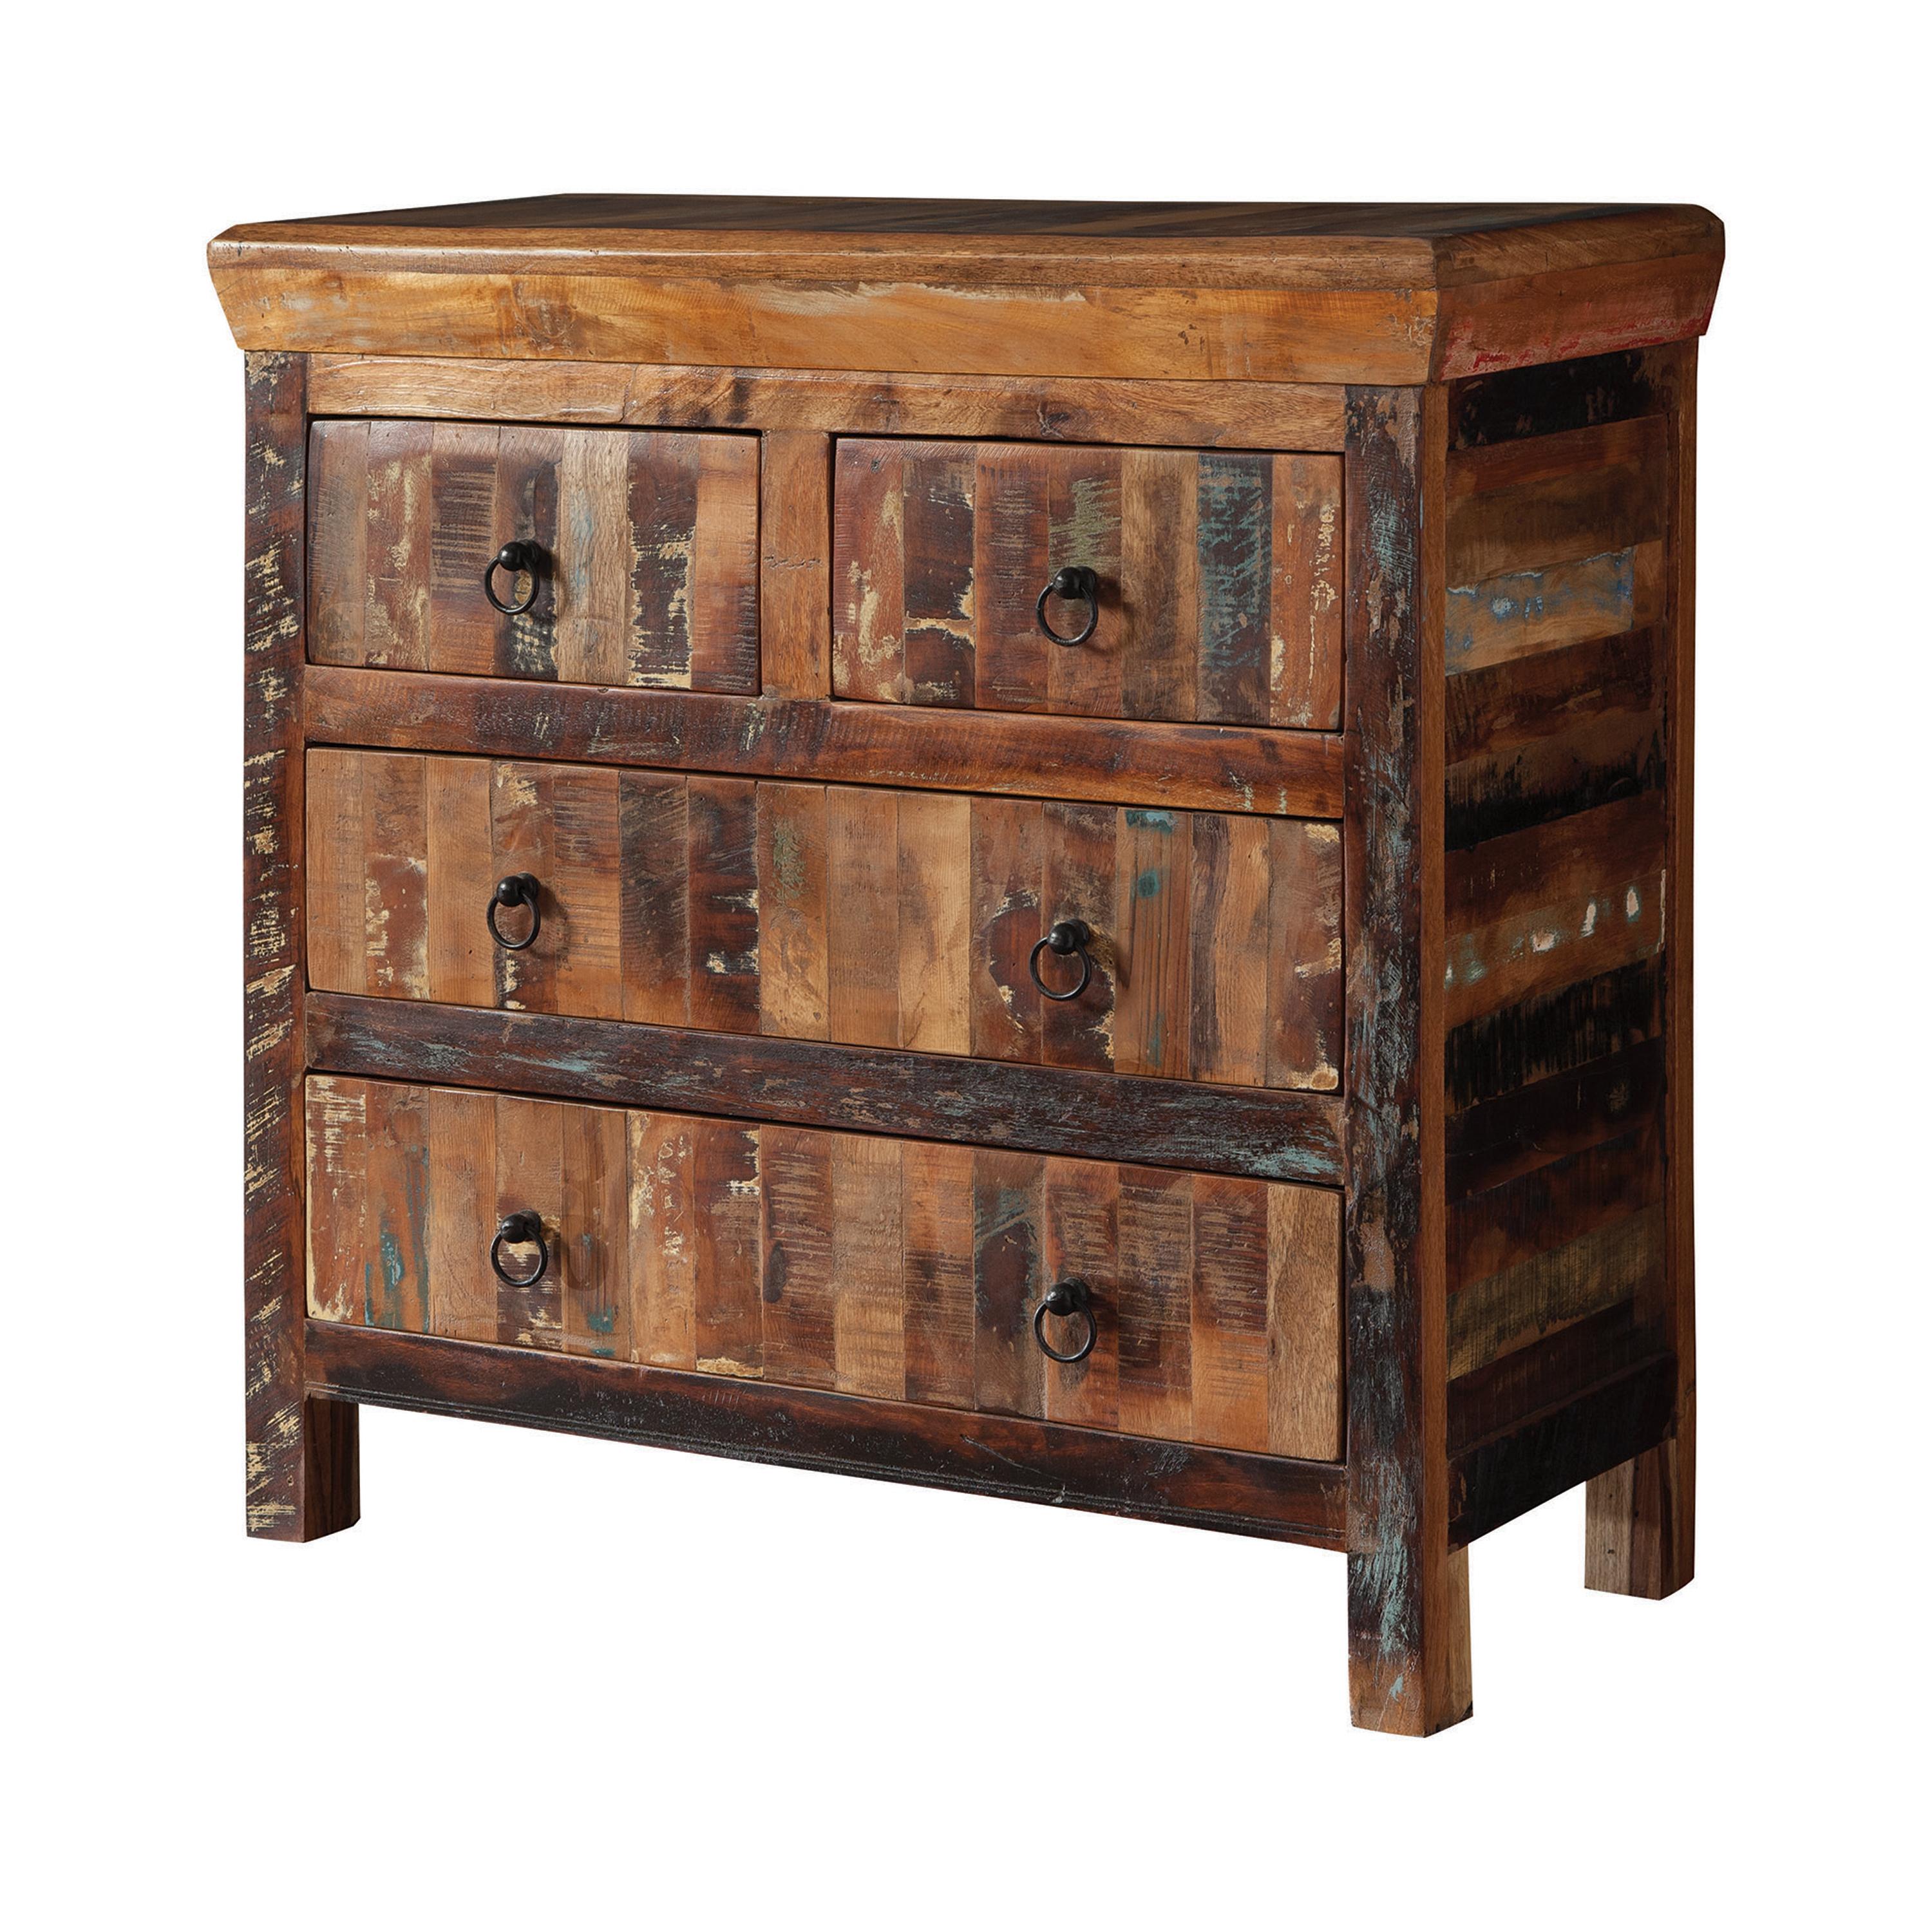 Rustic Accent Cabinet 950366 950366 in Wood 